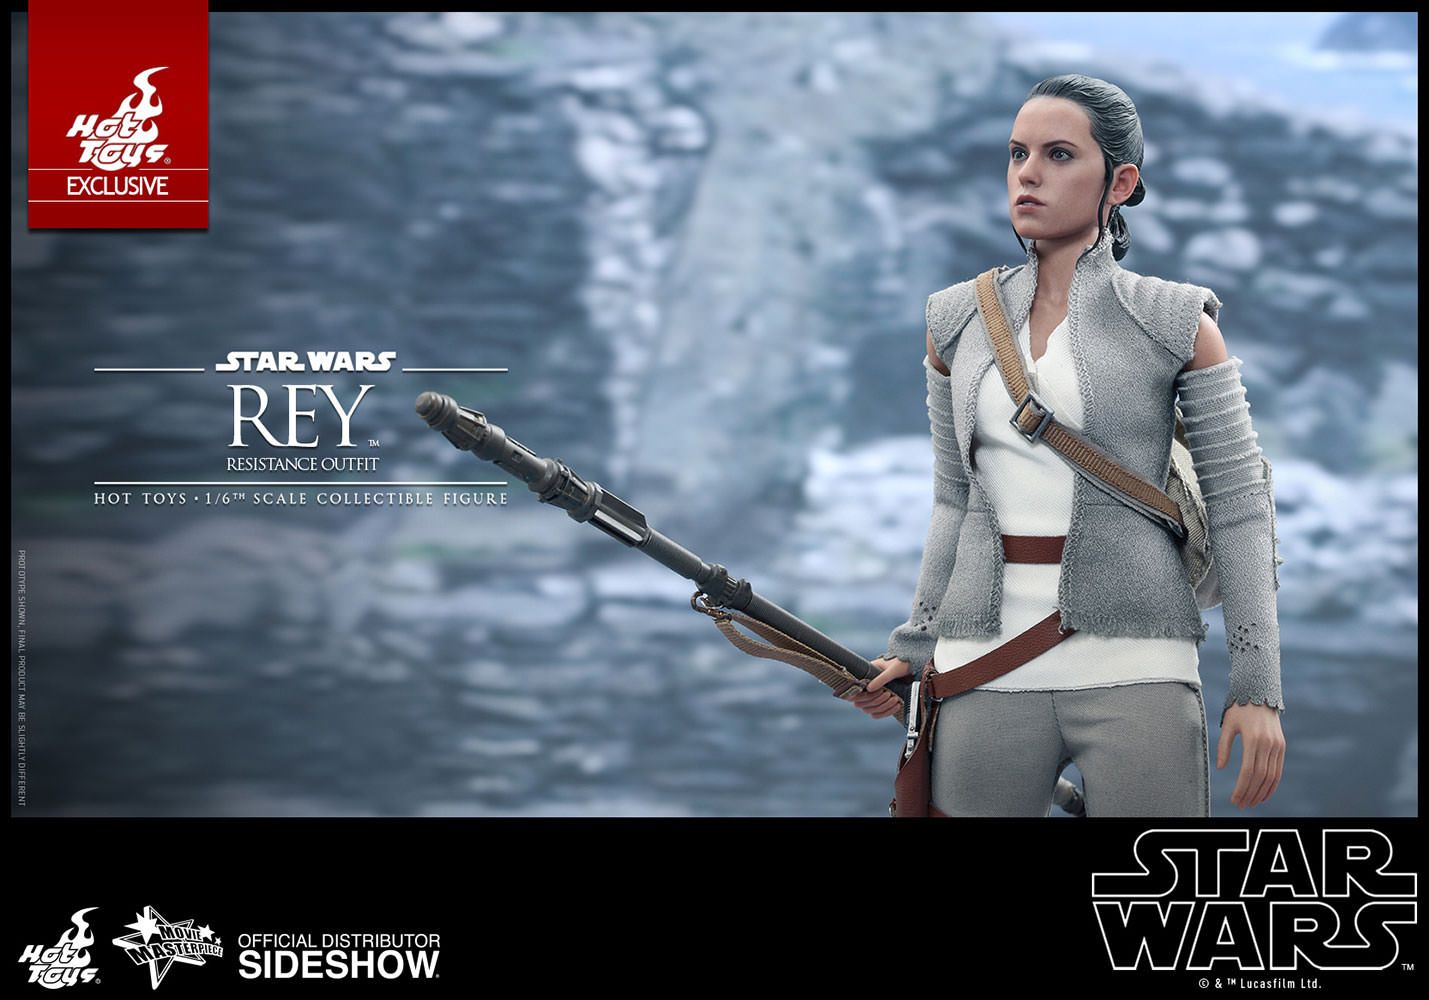 Hot Toys HOT TOYS STAR WARS REY RESISTANCE OUTFIT SIDESHOW EXCLUSIVE 1/6 SCALE MMS377 